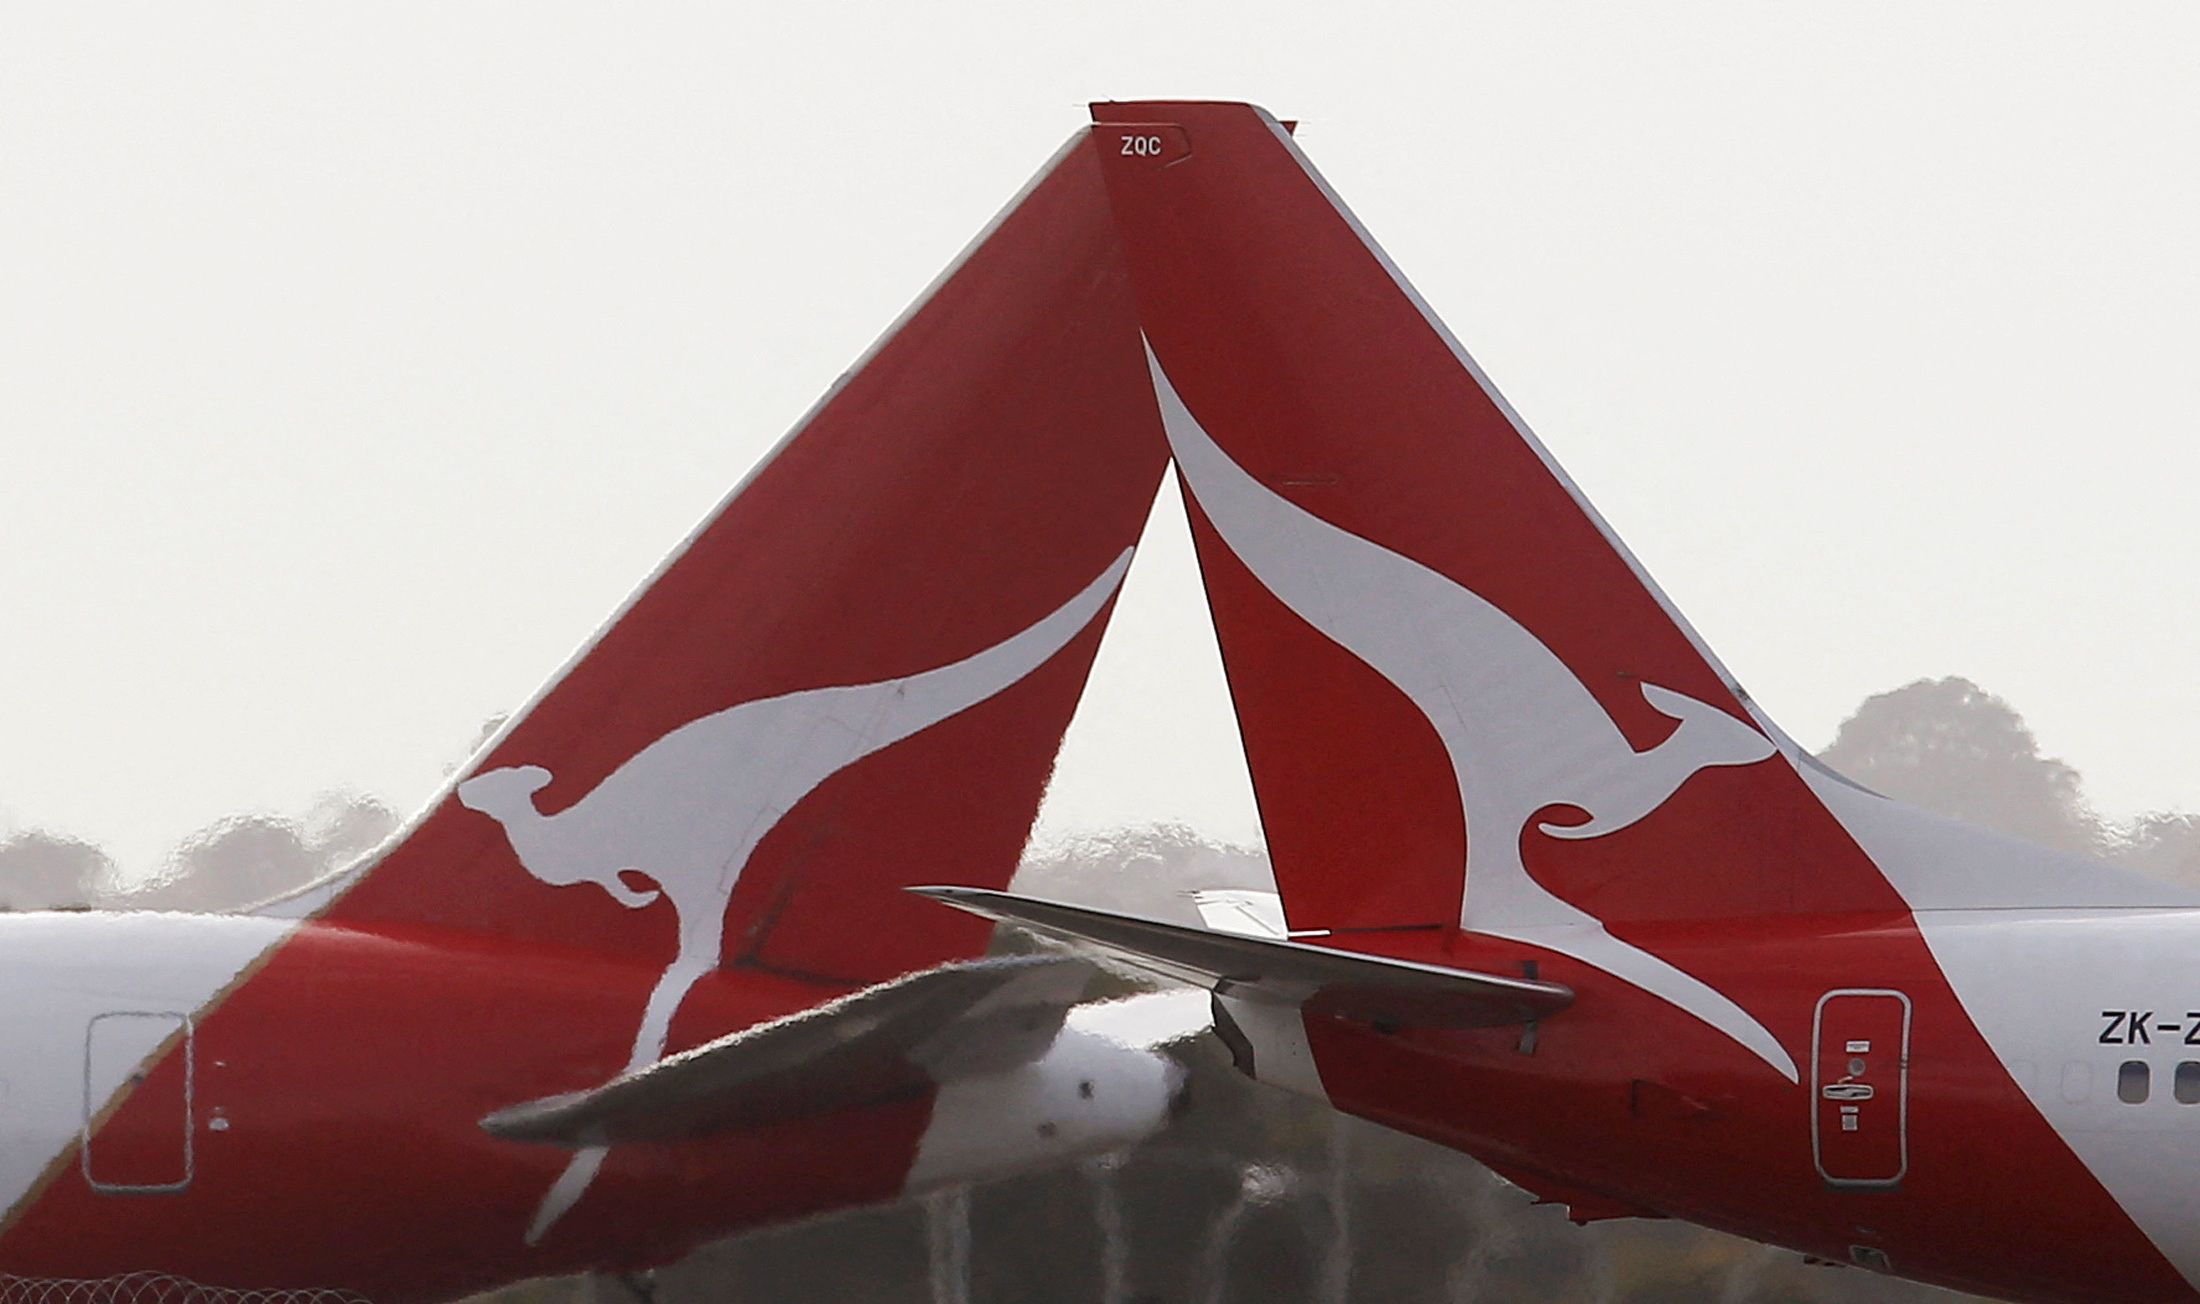 Two Qantas passenger jets cross each other at Kingsford Smith International airport in Sydney